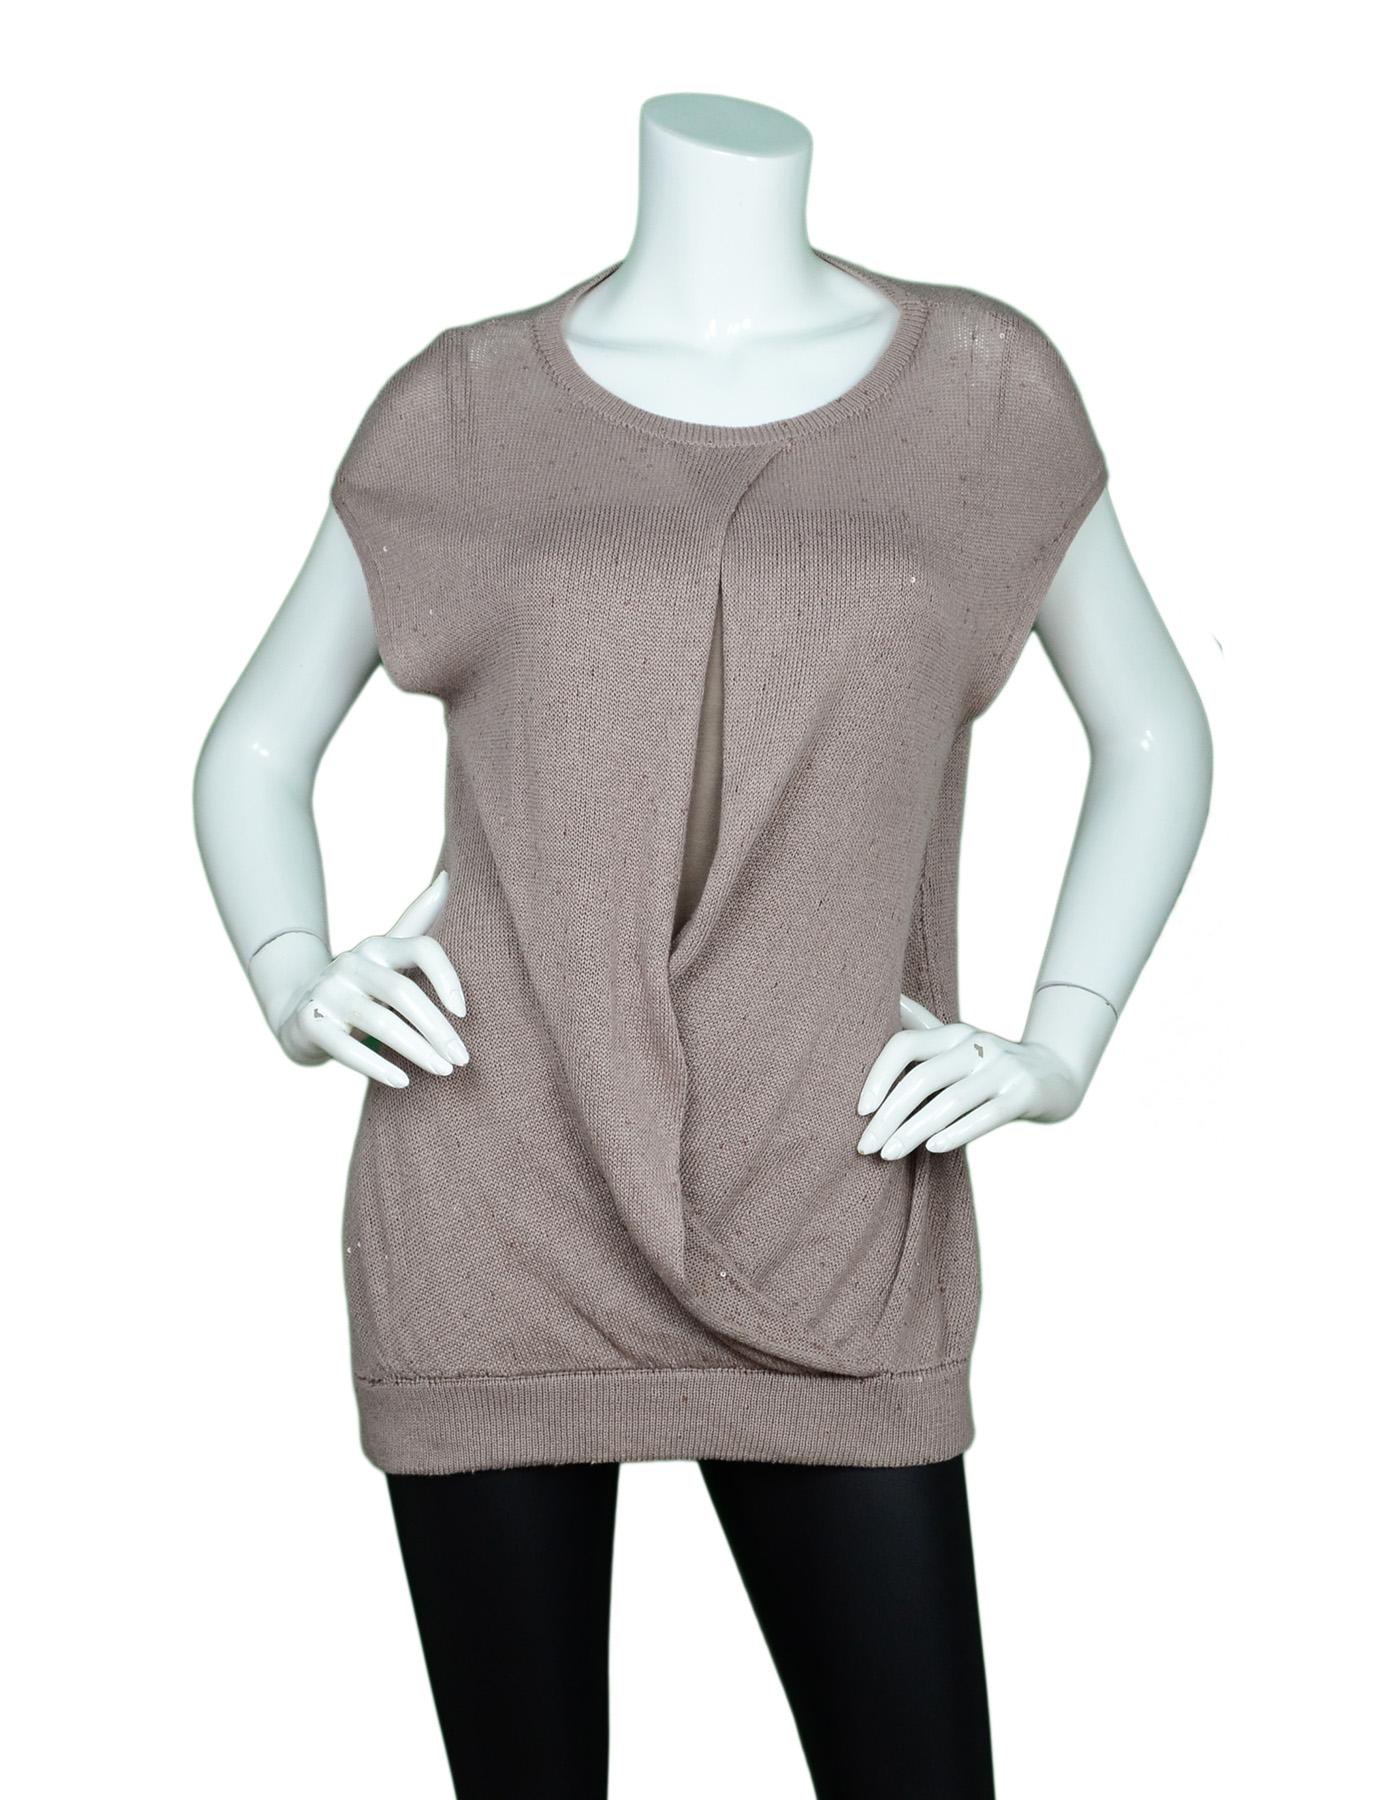 Brunello Cucinelli Mauve Sleeveless Knit Sequin Wrap Top W/ Strapless Lining Sz L

Made In: Italy
Color: Mauve
Materials: 93% cotton, 7% elastane
Opening/Closure: Pull over
Overall Condition: Excellent pre-owned condition with exception of minor